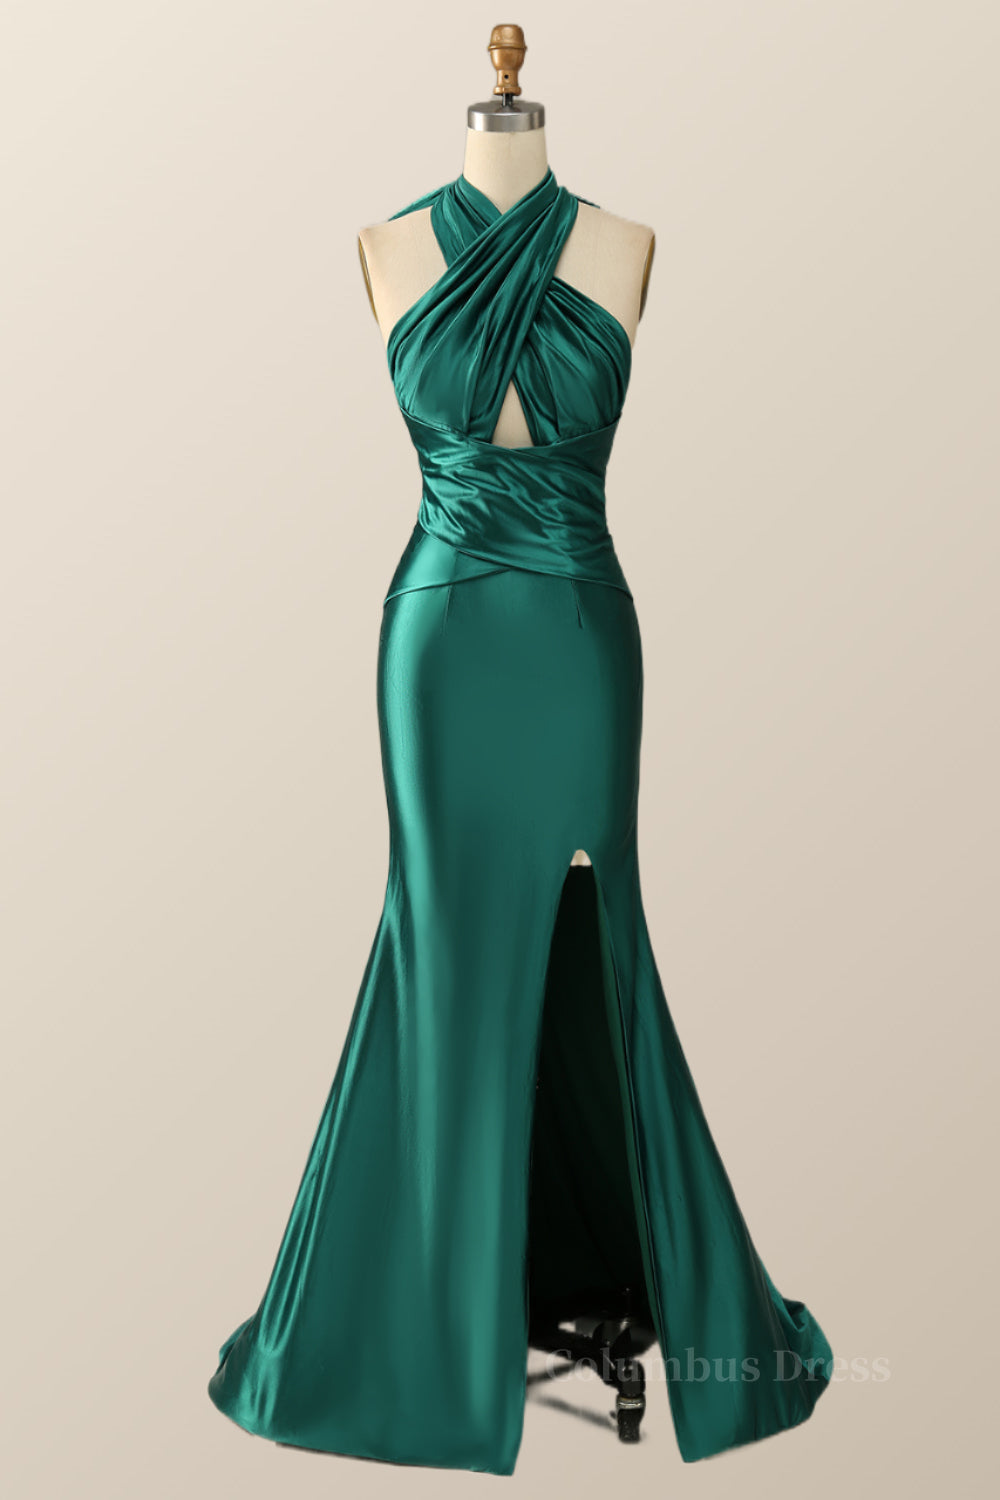 Party Dress Pinterest, Green Cross Front Mermaid Long Formal Dress with Slit